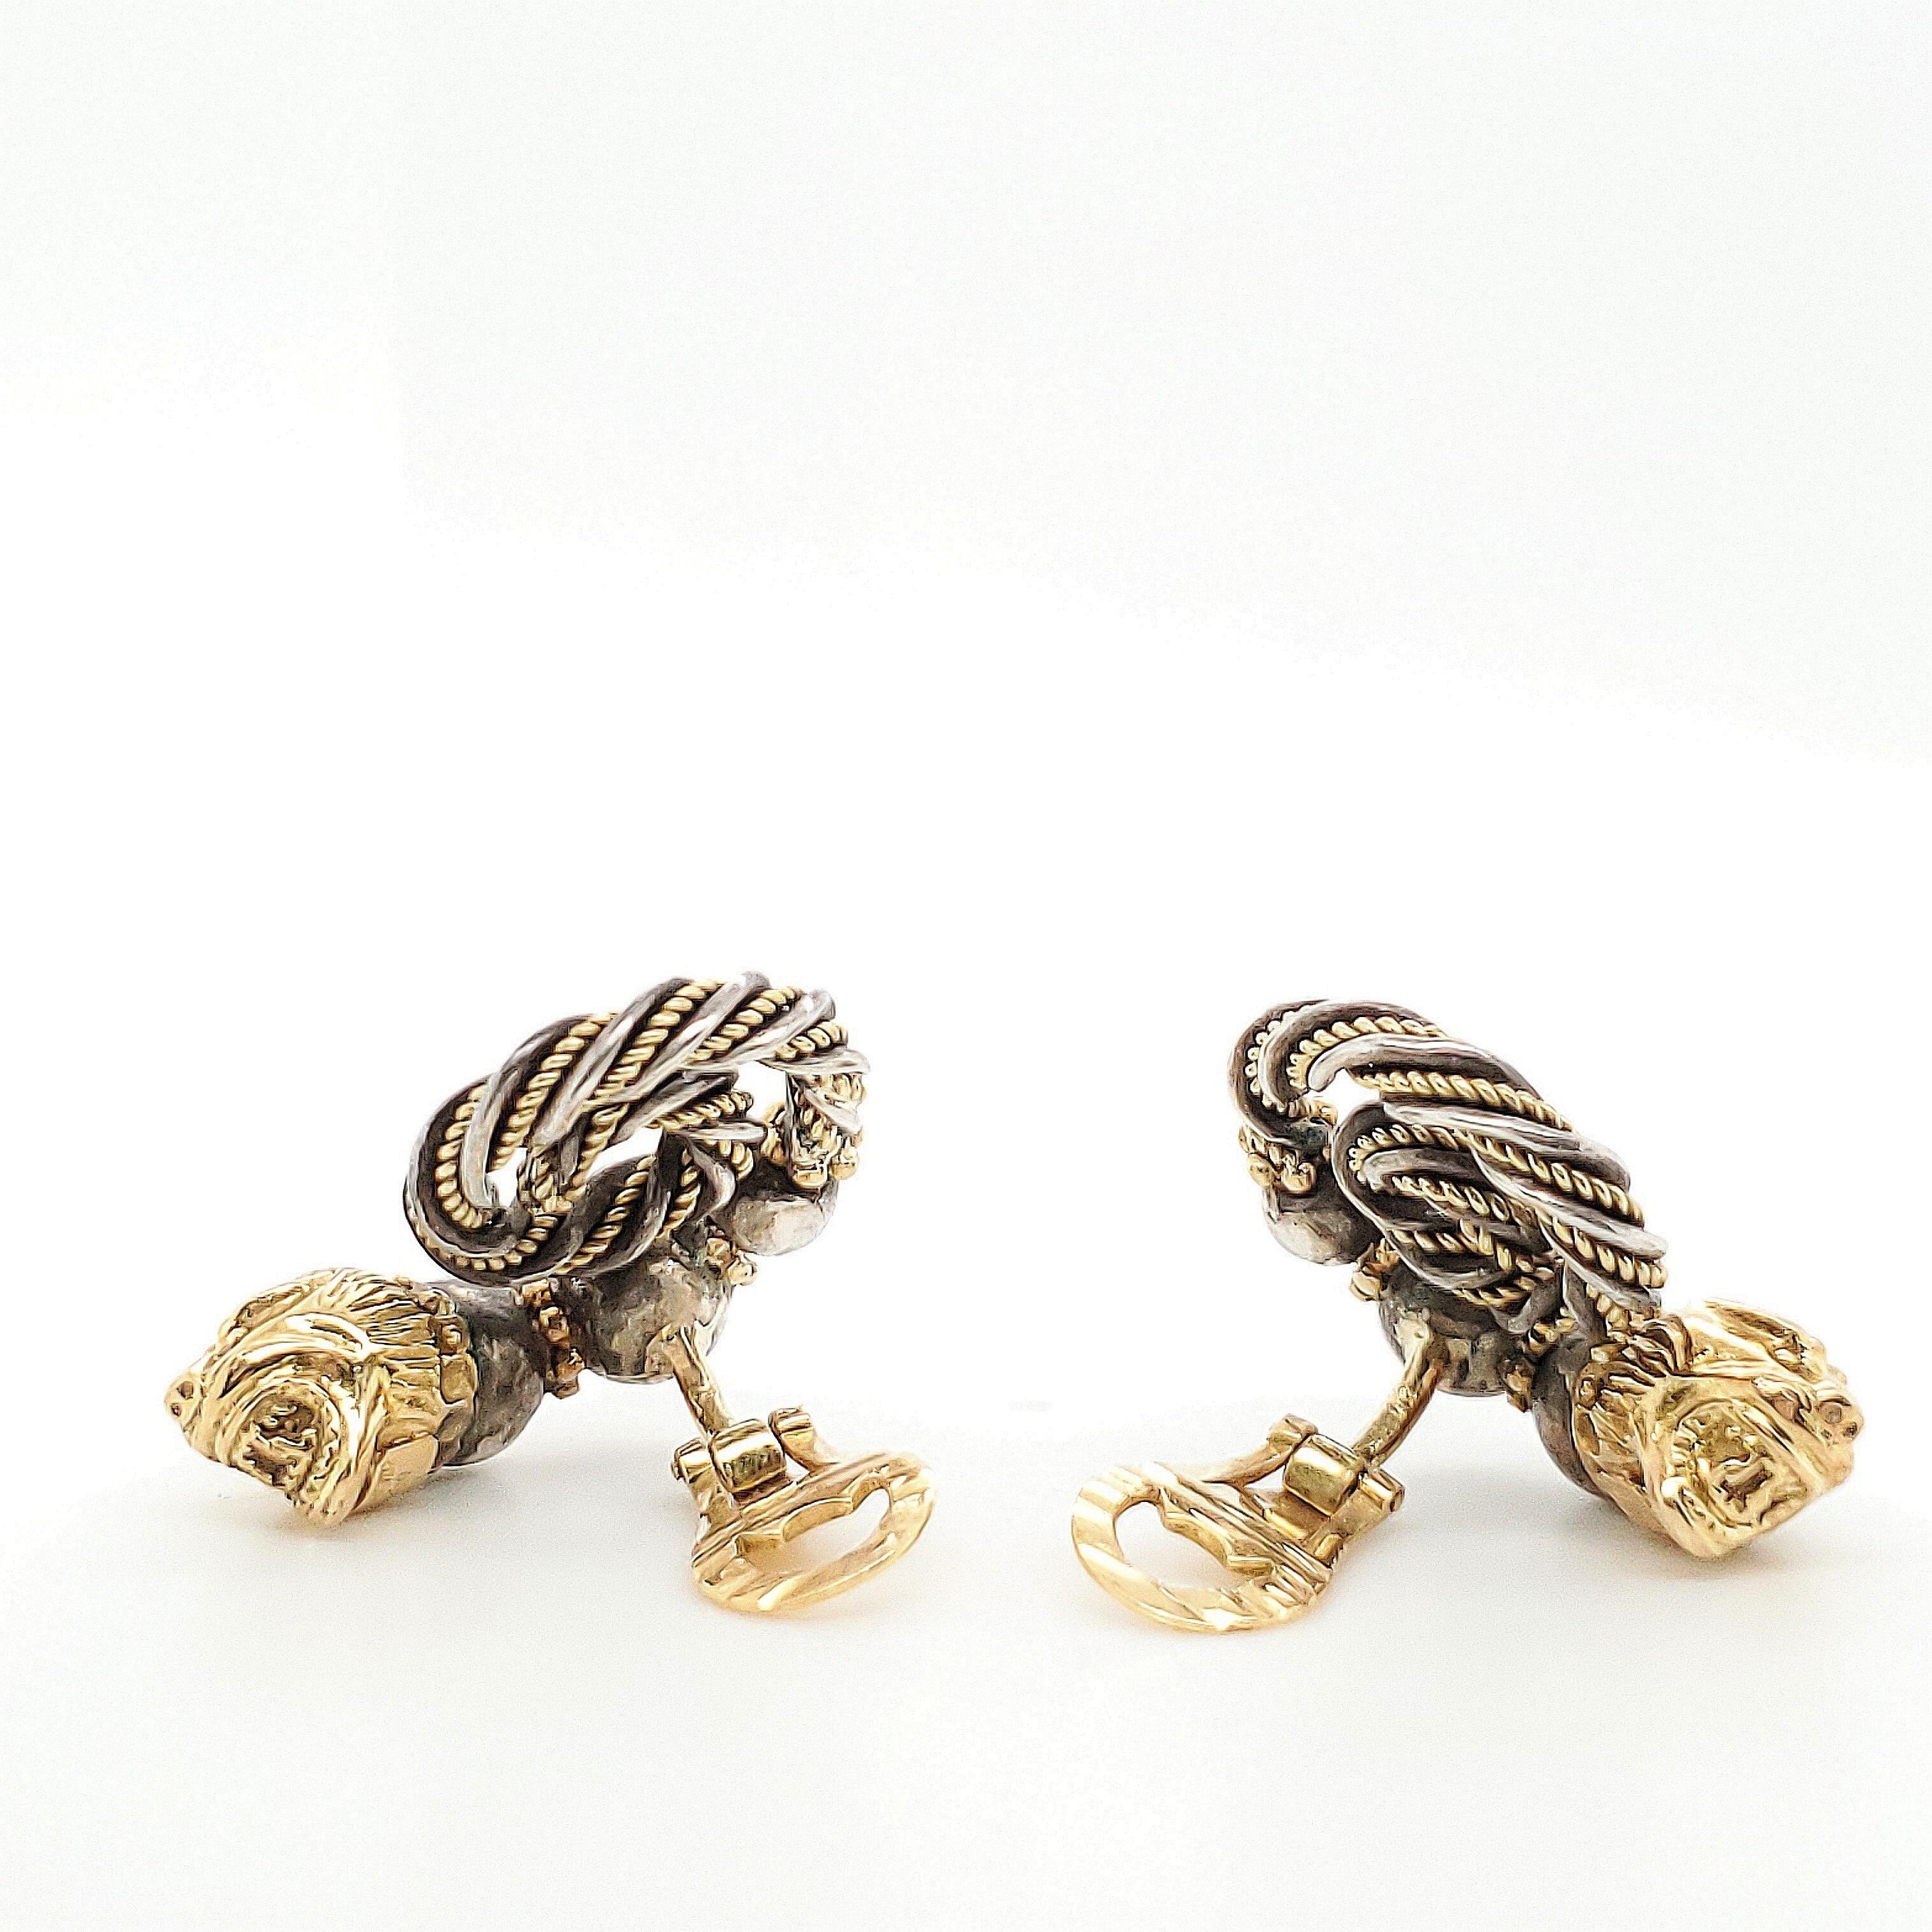 Authentic Zolotas ear clips crafted in 18 karat yellow gold and silver.  The earrings feature a lion head with round silver beads tapering to a spiral of twisted gold and silver.  The ear clips measure 1 1/2 inches in length and 1 inch at the widest